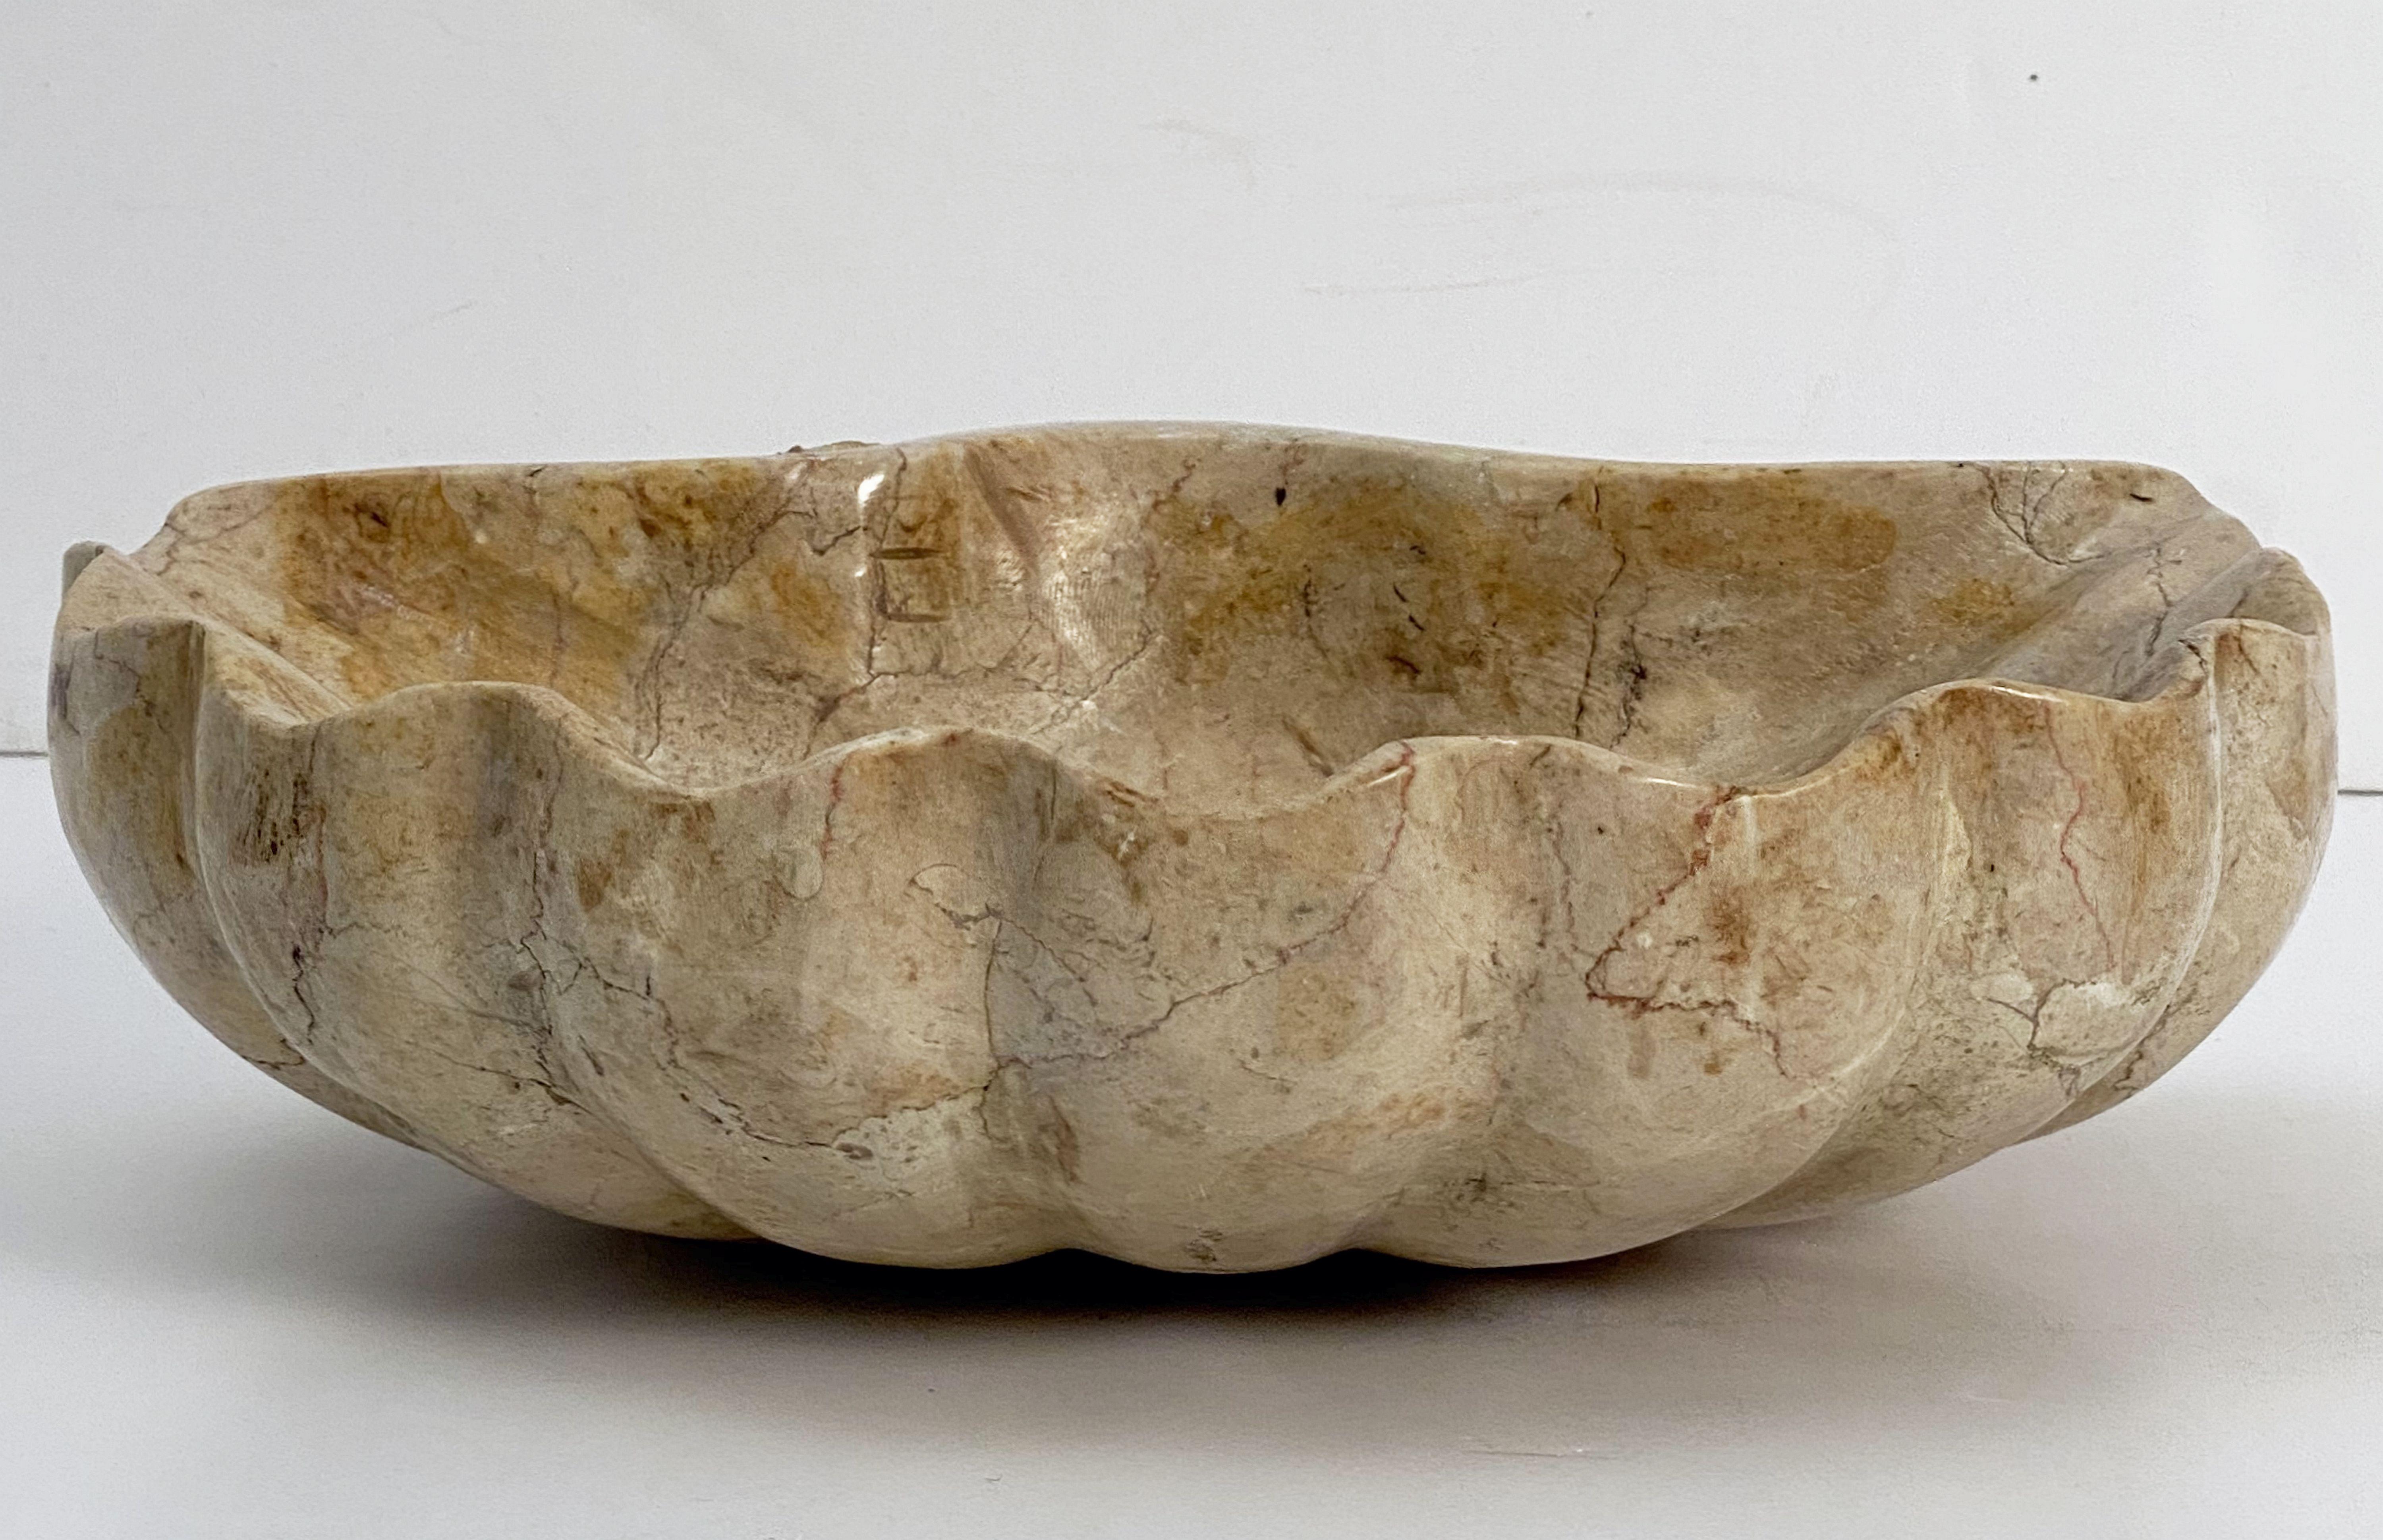 A fine Italian font or basin bowl centerpiece of figured marble featuring a carved shell design.

Dimensions are H 3 3/4 inches x W 11 1/2 inches x D 11 1/4 inches.